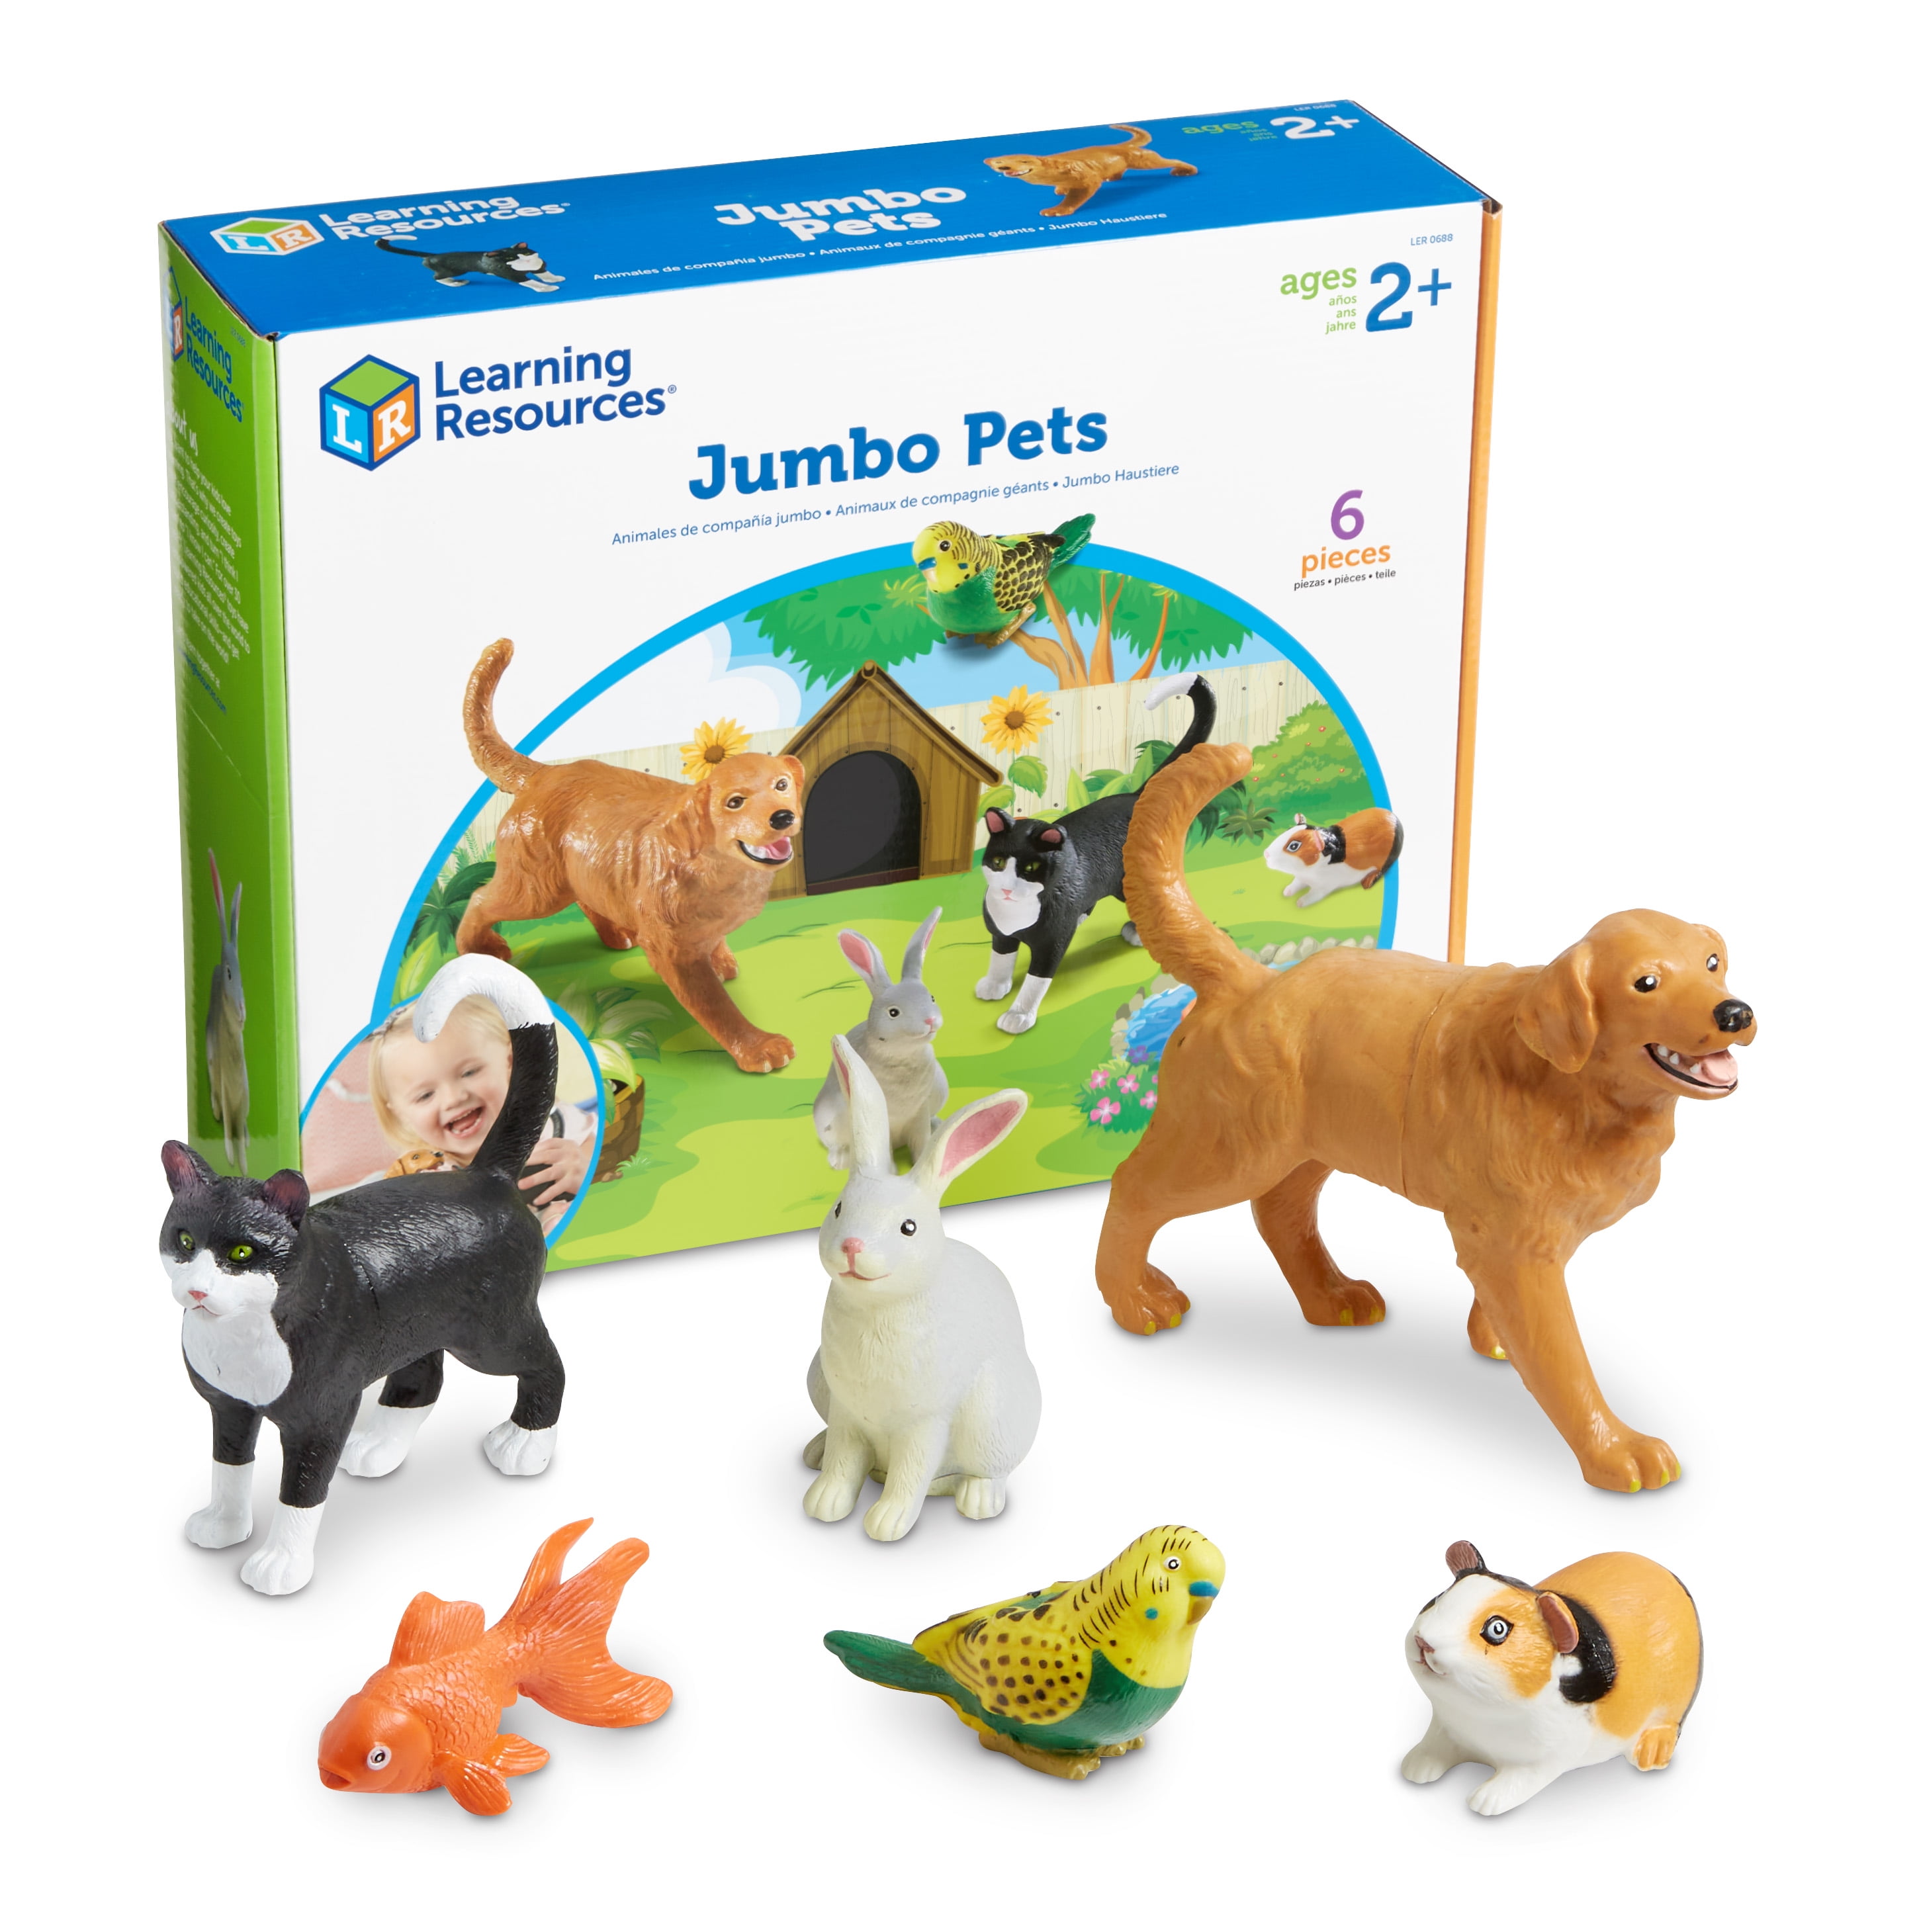 Learning Resources Jumbo Pets - 6 Pieces, Boys and Girls Ages 2+, Toddler  Learning Toy, Animal Figures For Kids 